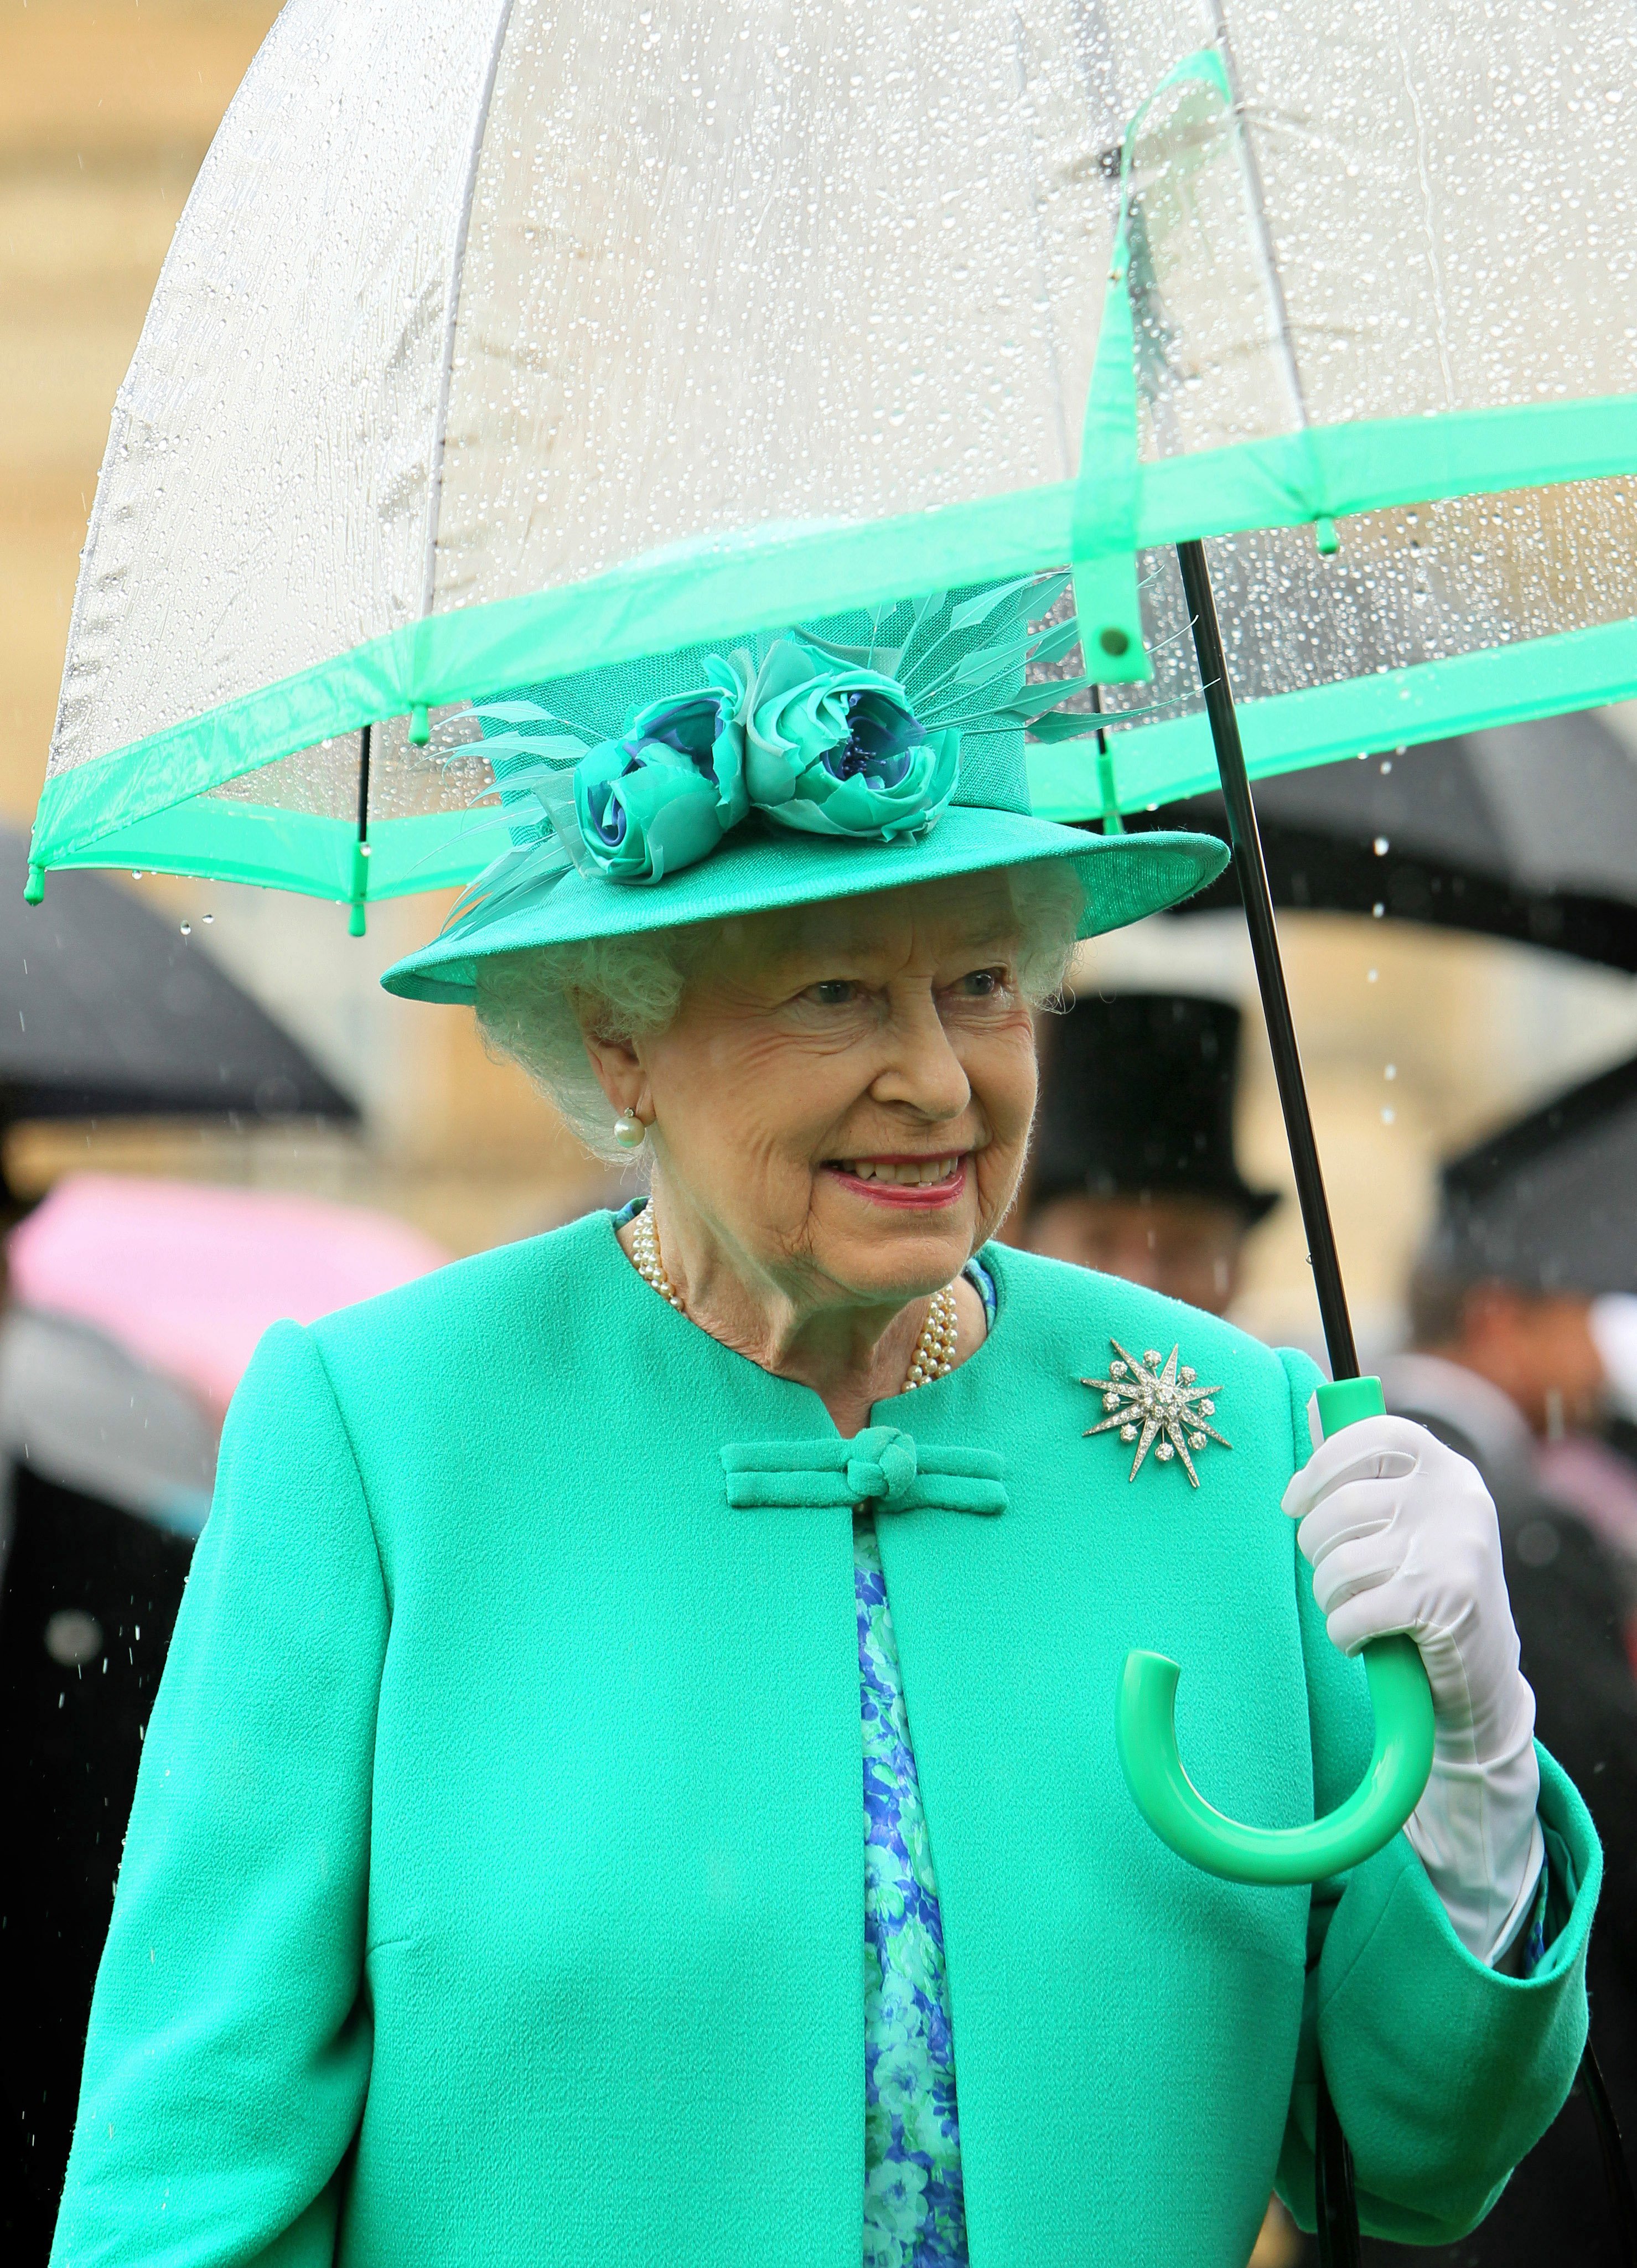 Queen Elizabeth II shelters from the rain under an umbrella at Buckingham Palace on July 19, 2011 in London, England | Photo: Getty Images